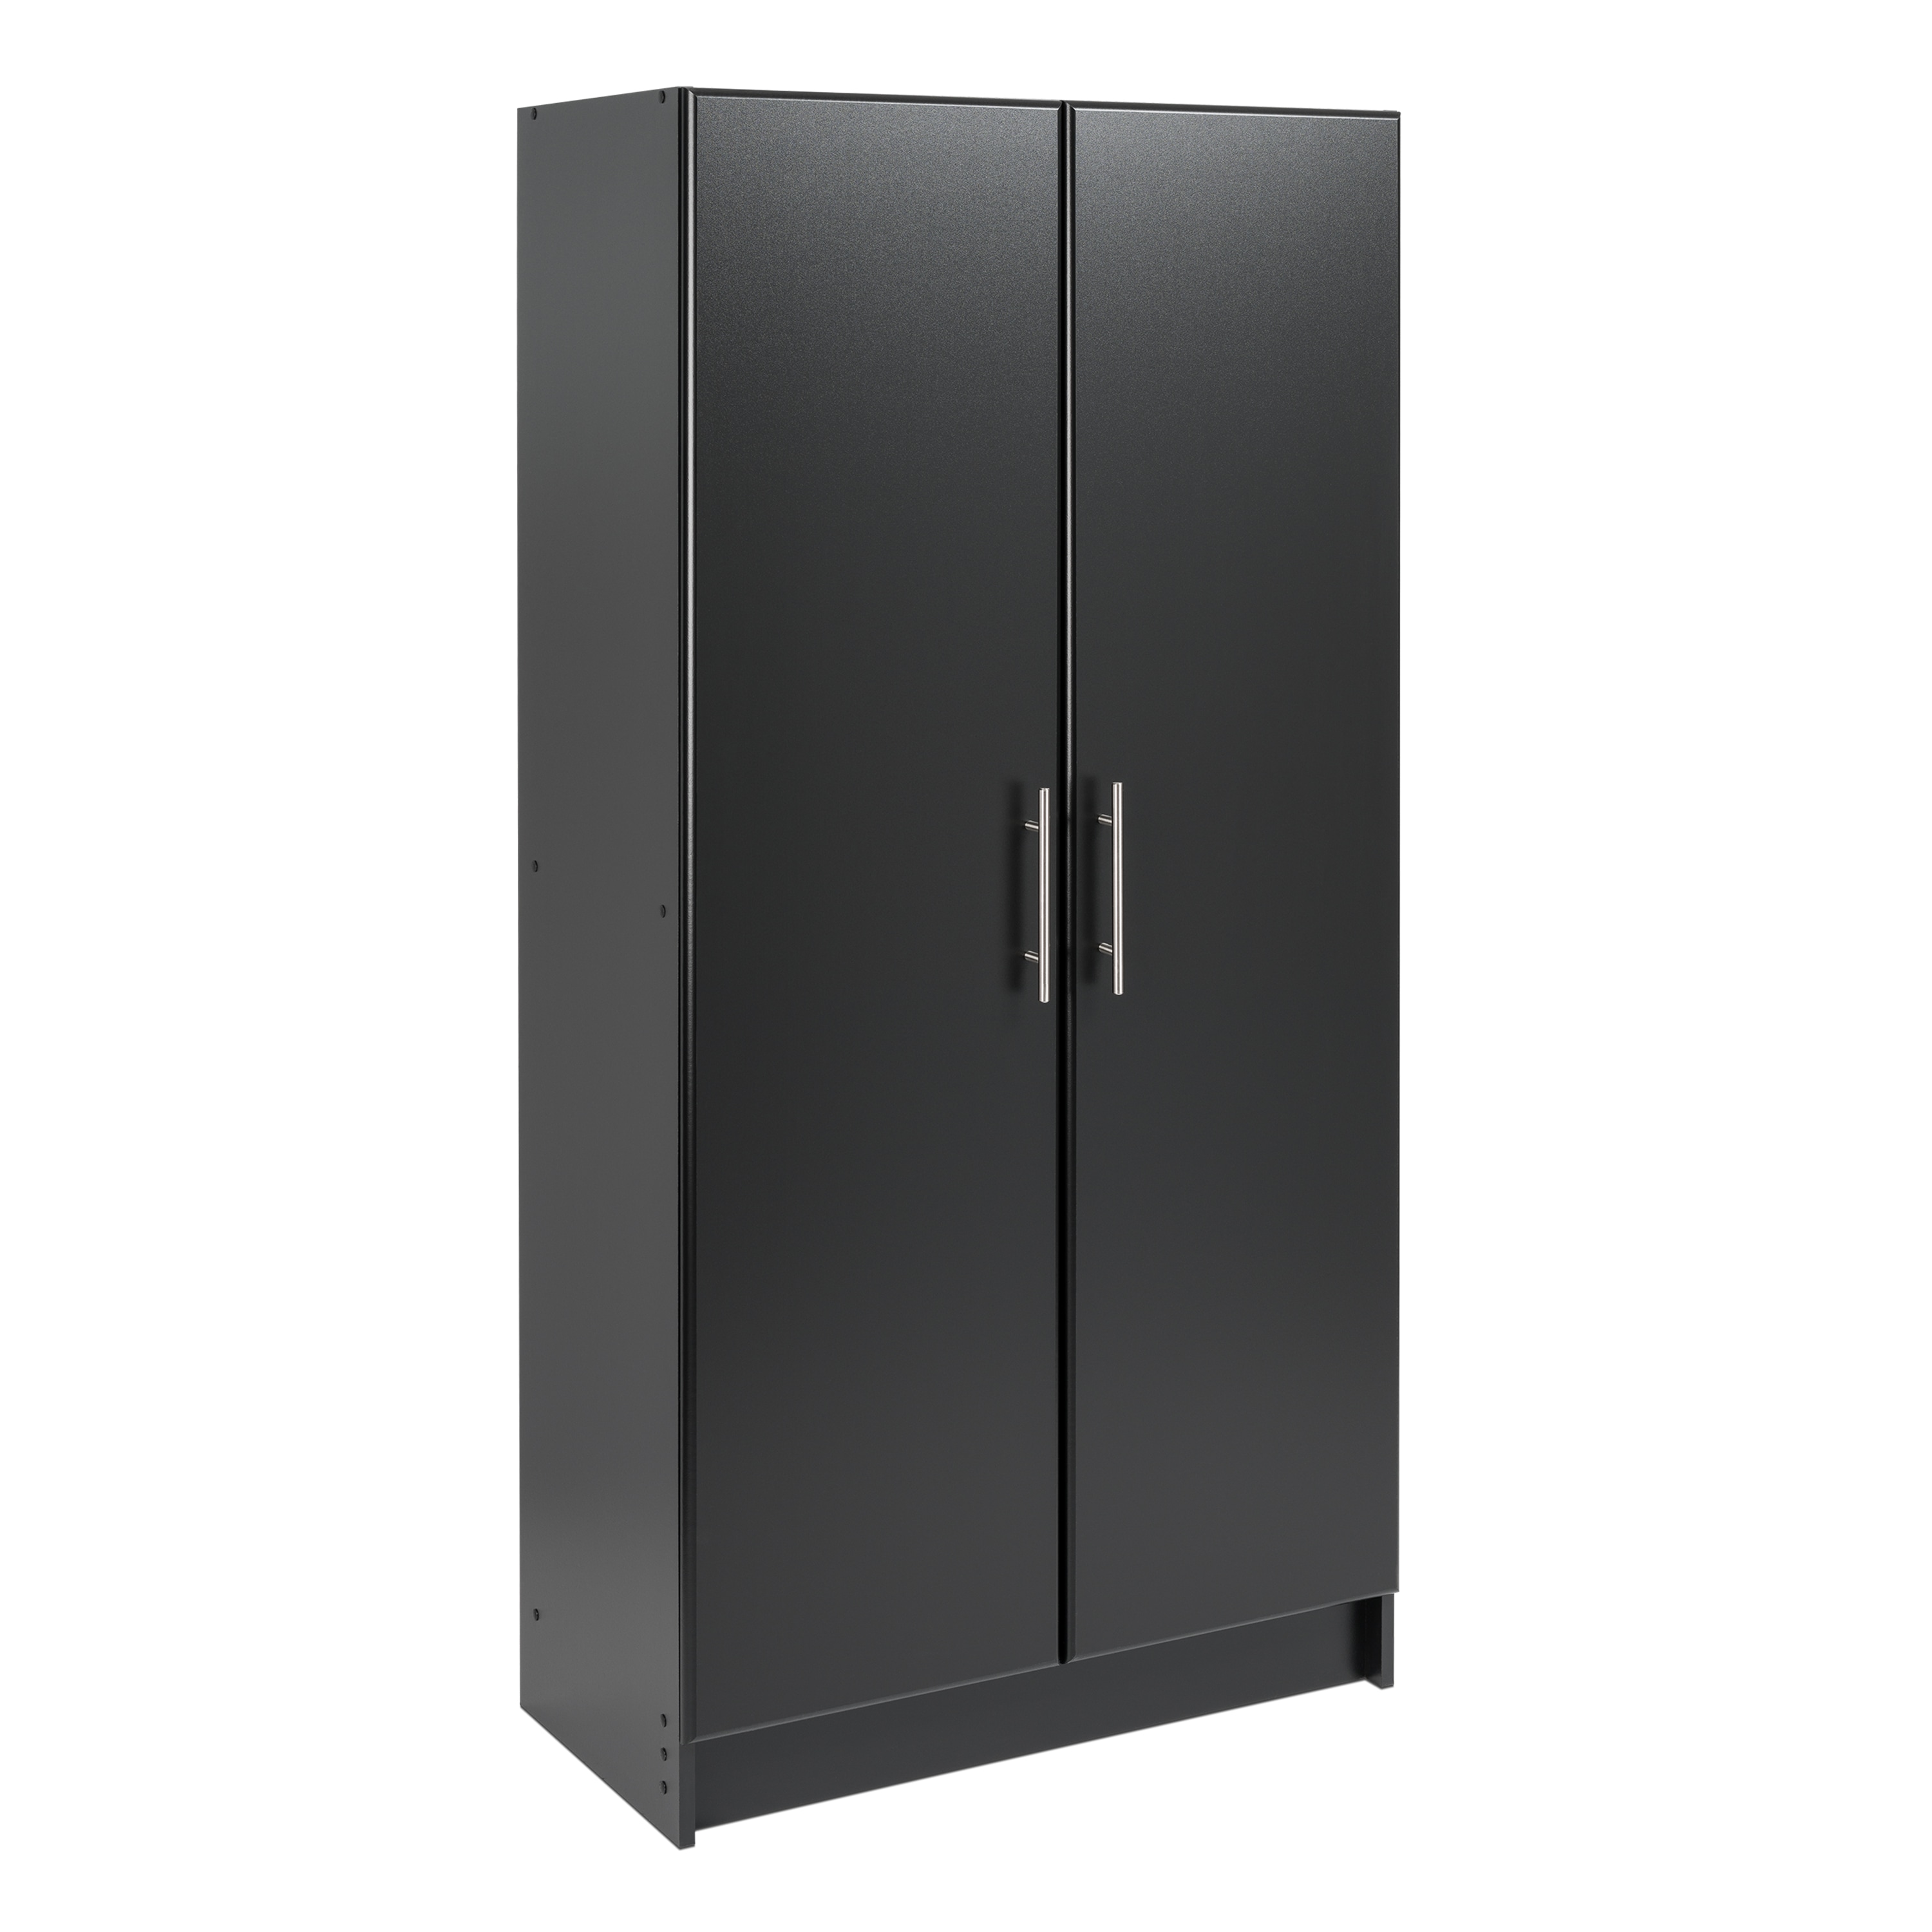 Details about   Harmony 30-inch Wall Mount Storage Cabinet 